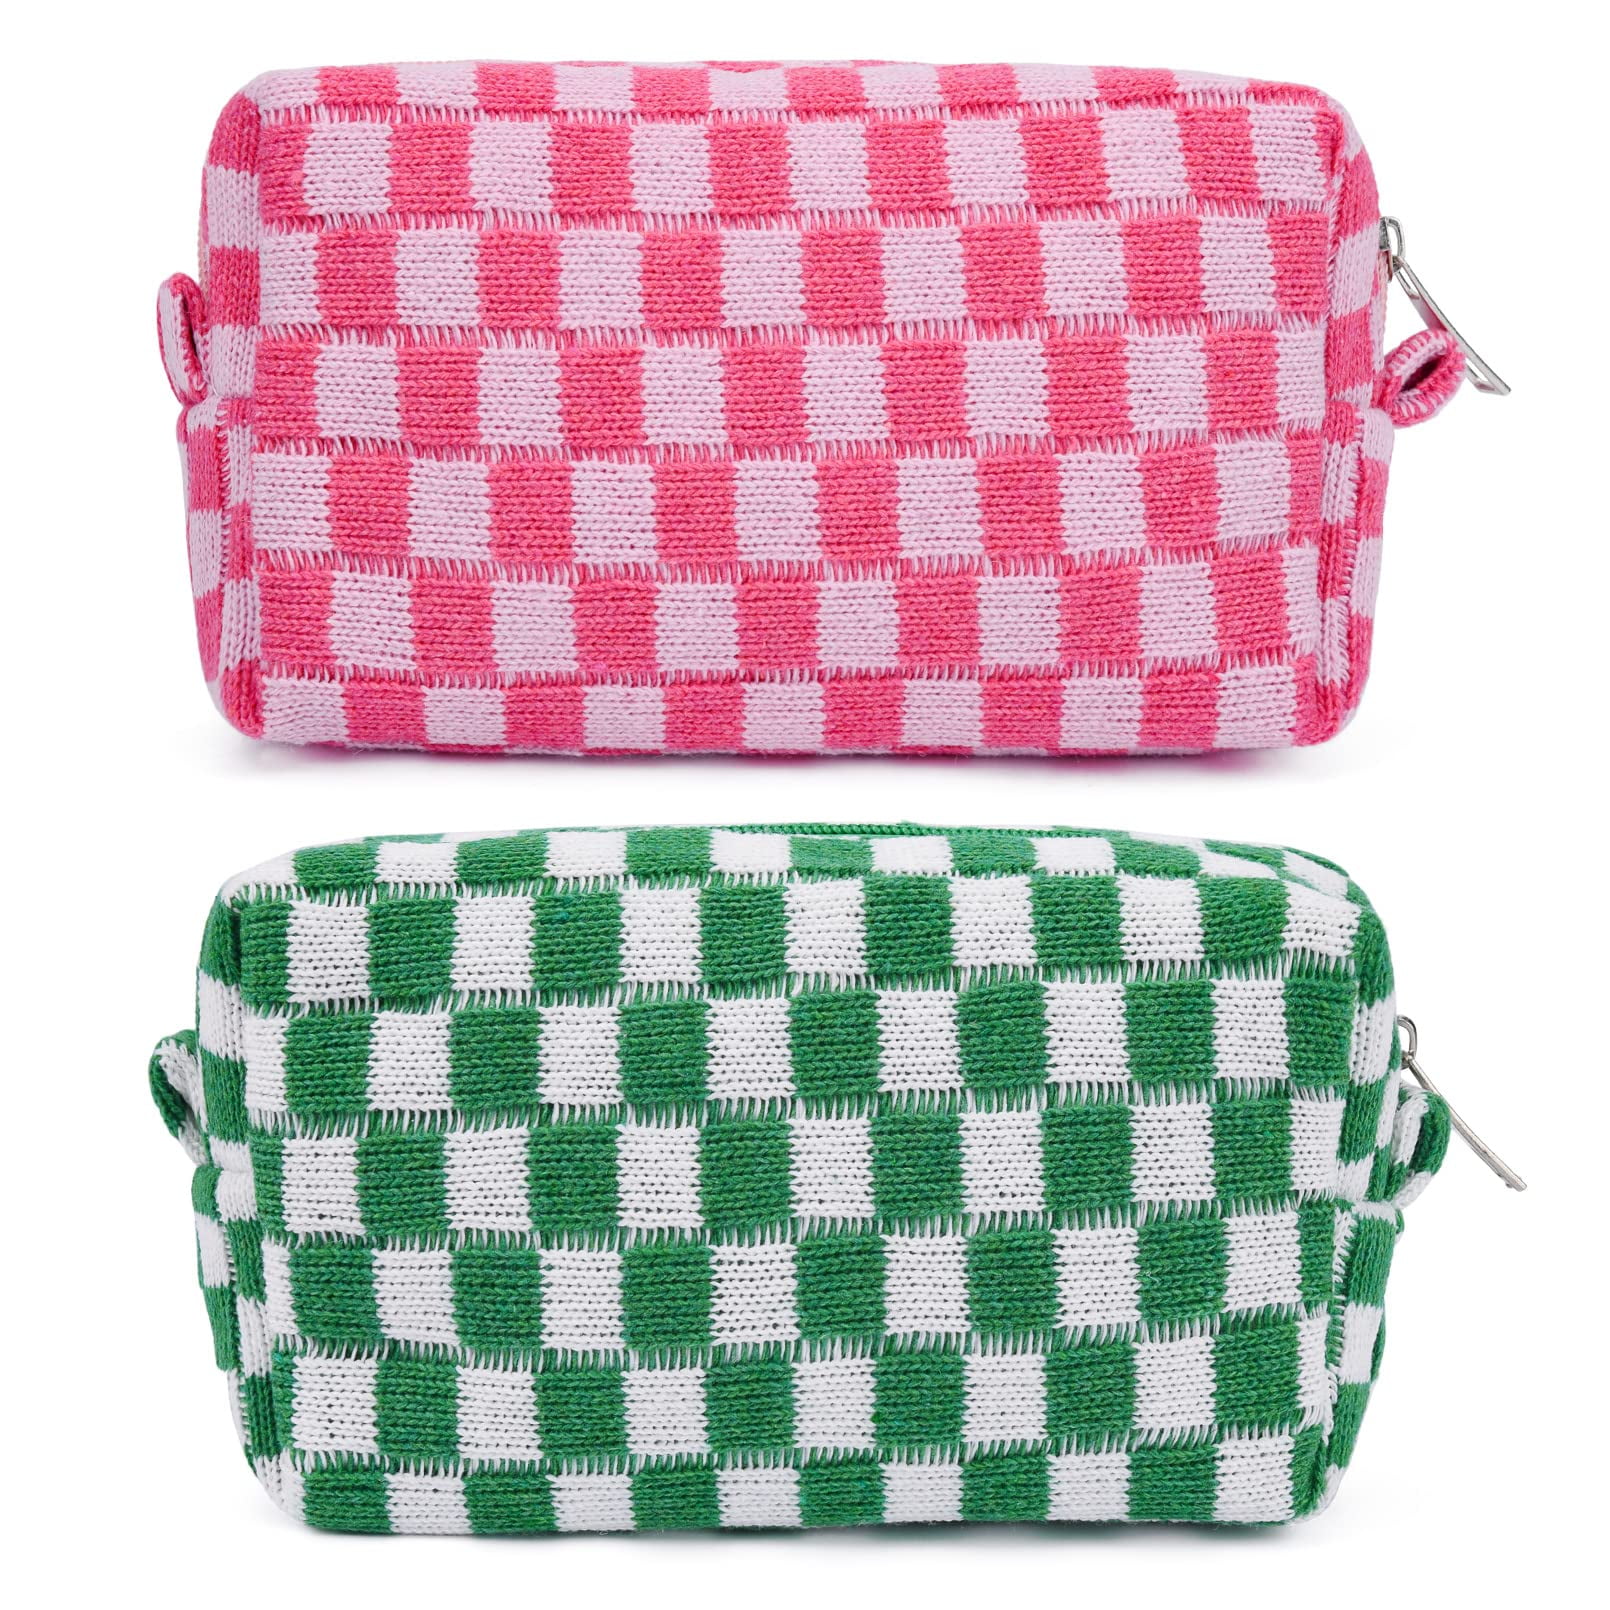 Qepwscx Makeup Bag Checkered Makeup Bag Travel Toiletry Bag Checkered Cosmetic  Bag Portable Makeup Bags Pouch Travel Organizer Cases For Women Girls  Vacation Travel Cosmetic Bag Travel Essentials Cle 